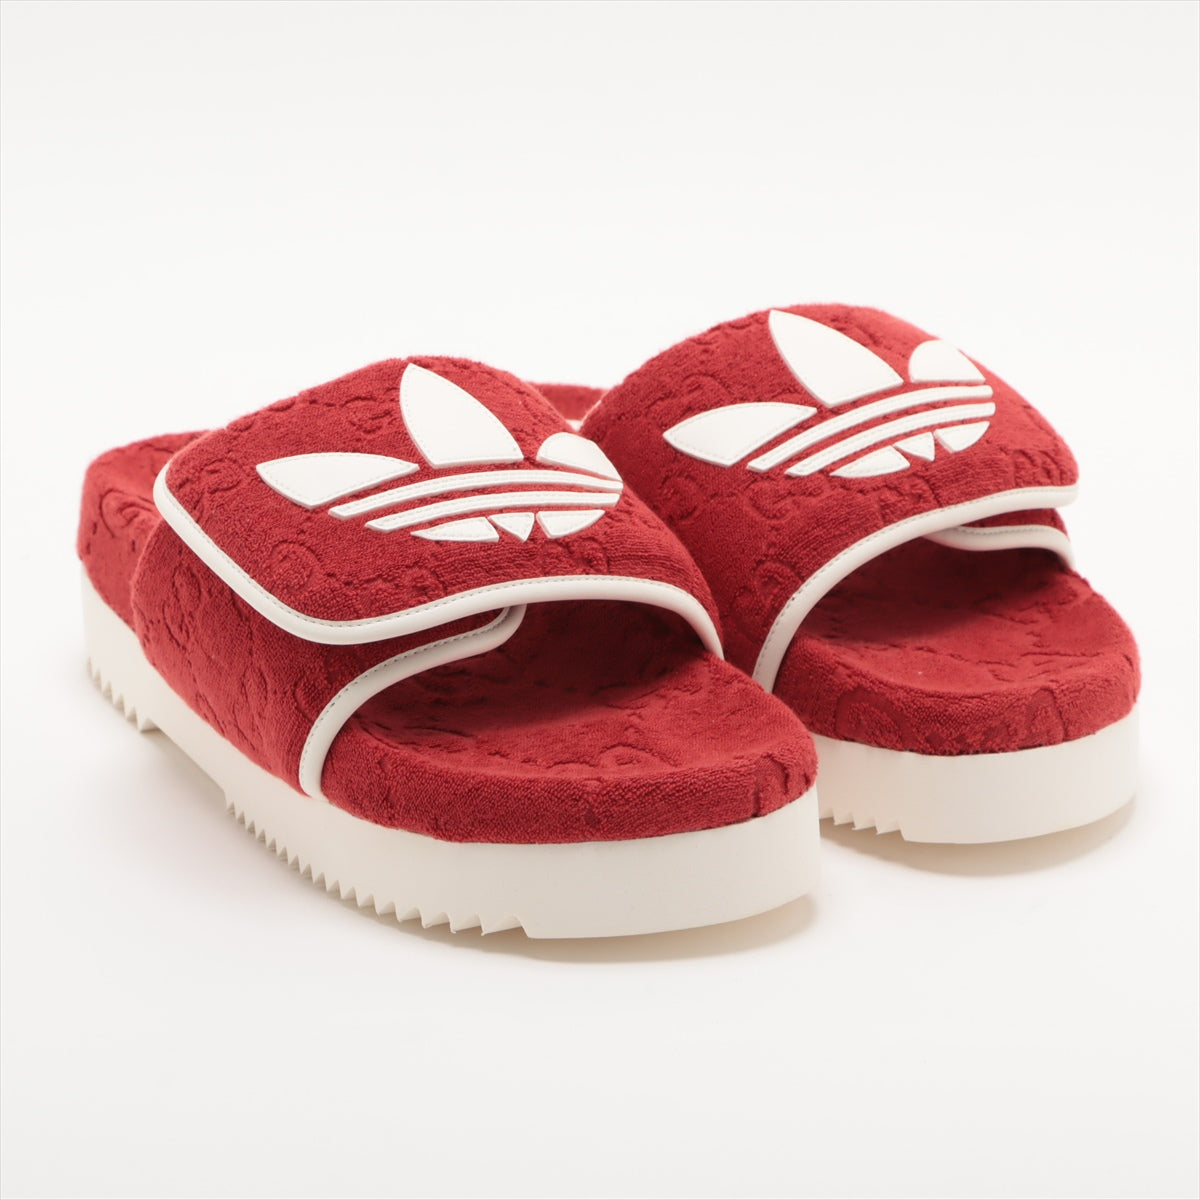 Gucci x adidas Cotton Sandals US9 Men's Red box There is a bag